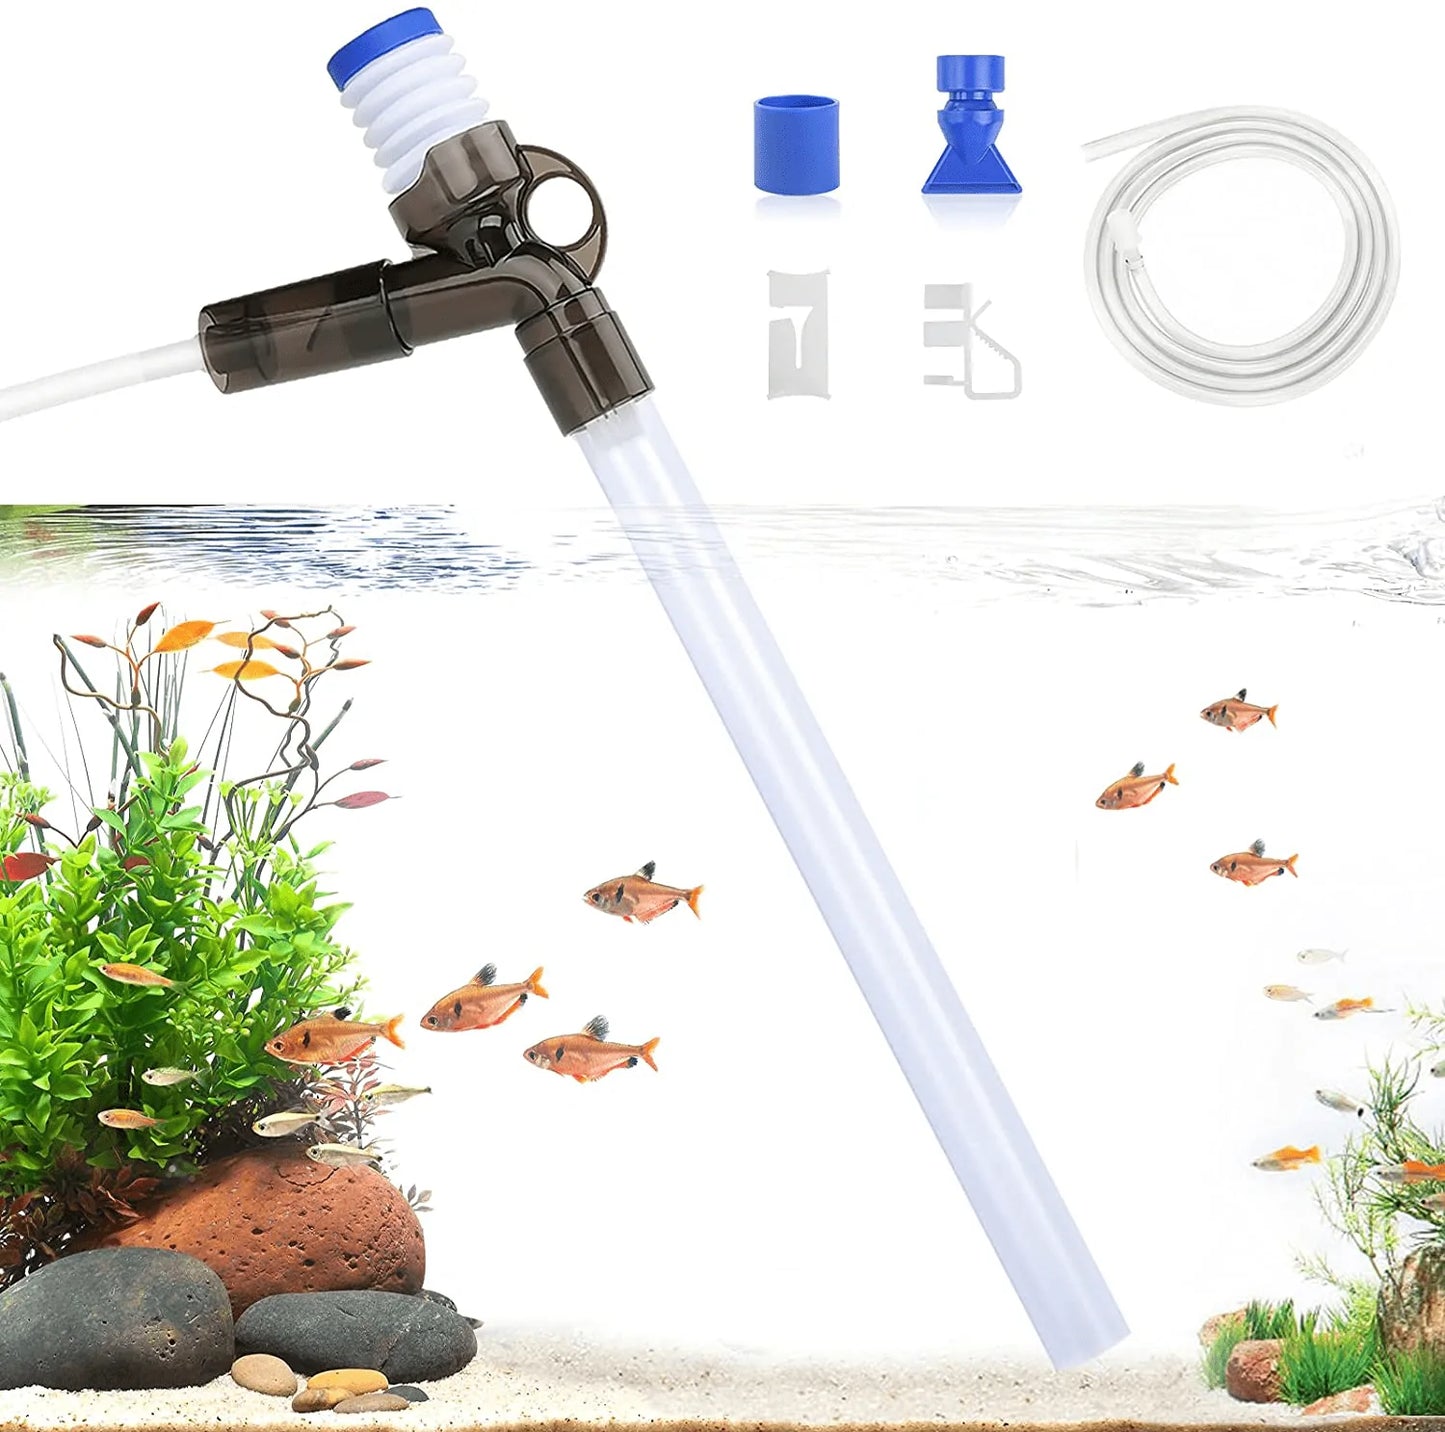 AQQA Aquarium Gravel Cleaner Fish Tank Sand Cleaner Kit Long Nozzle Water Changer with Air-Pressing Button and Adjustable Water Flow Controller for Water Changing and Filter Gravel Cleaning